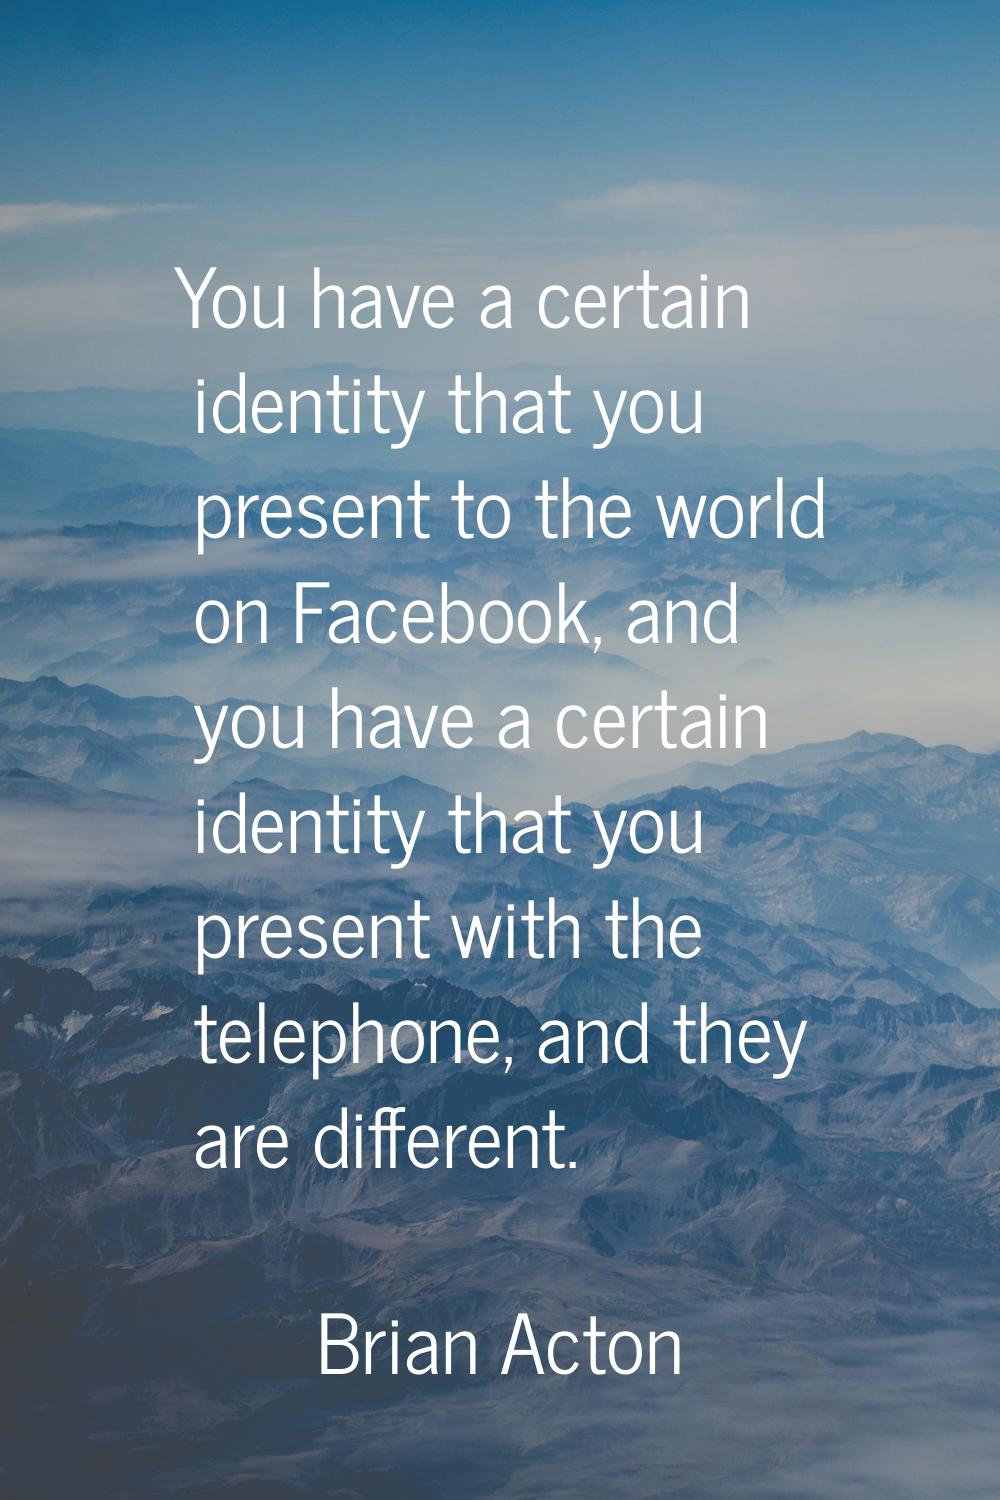 You have a certain identity that you present to the world on Facebook, and you have a certain ident